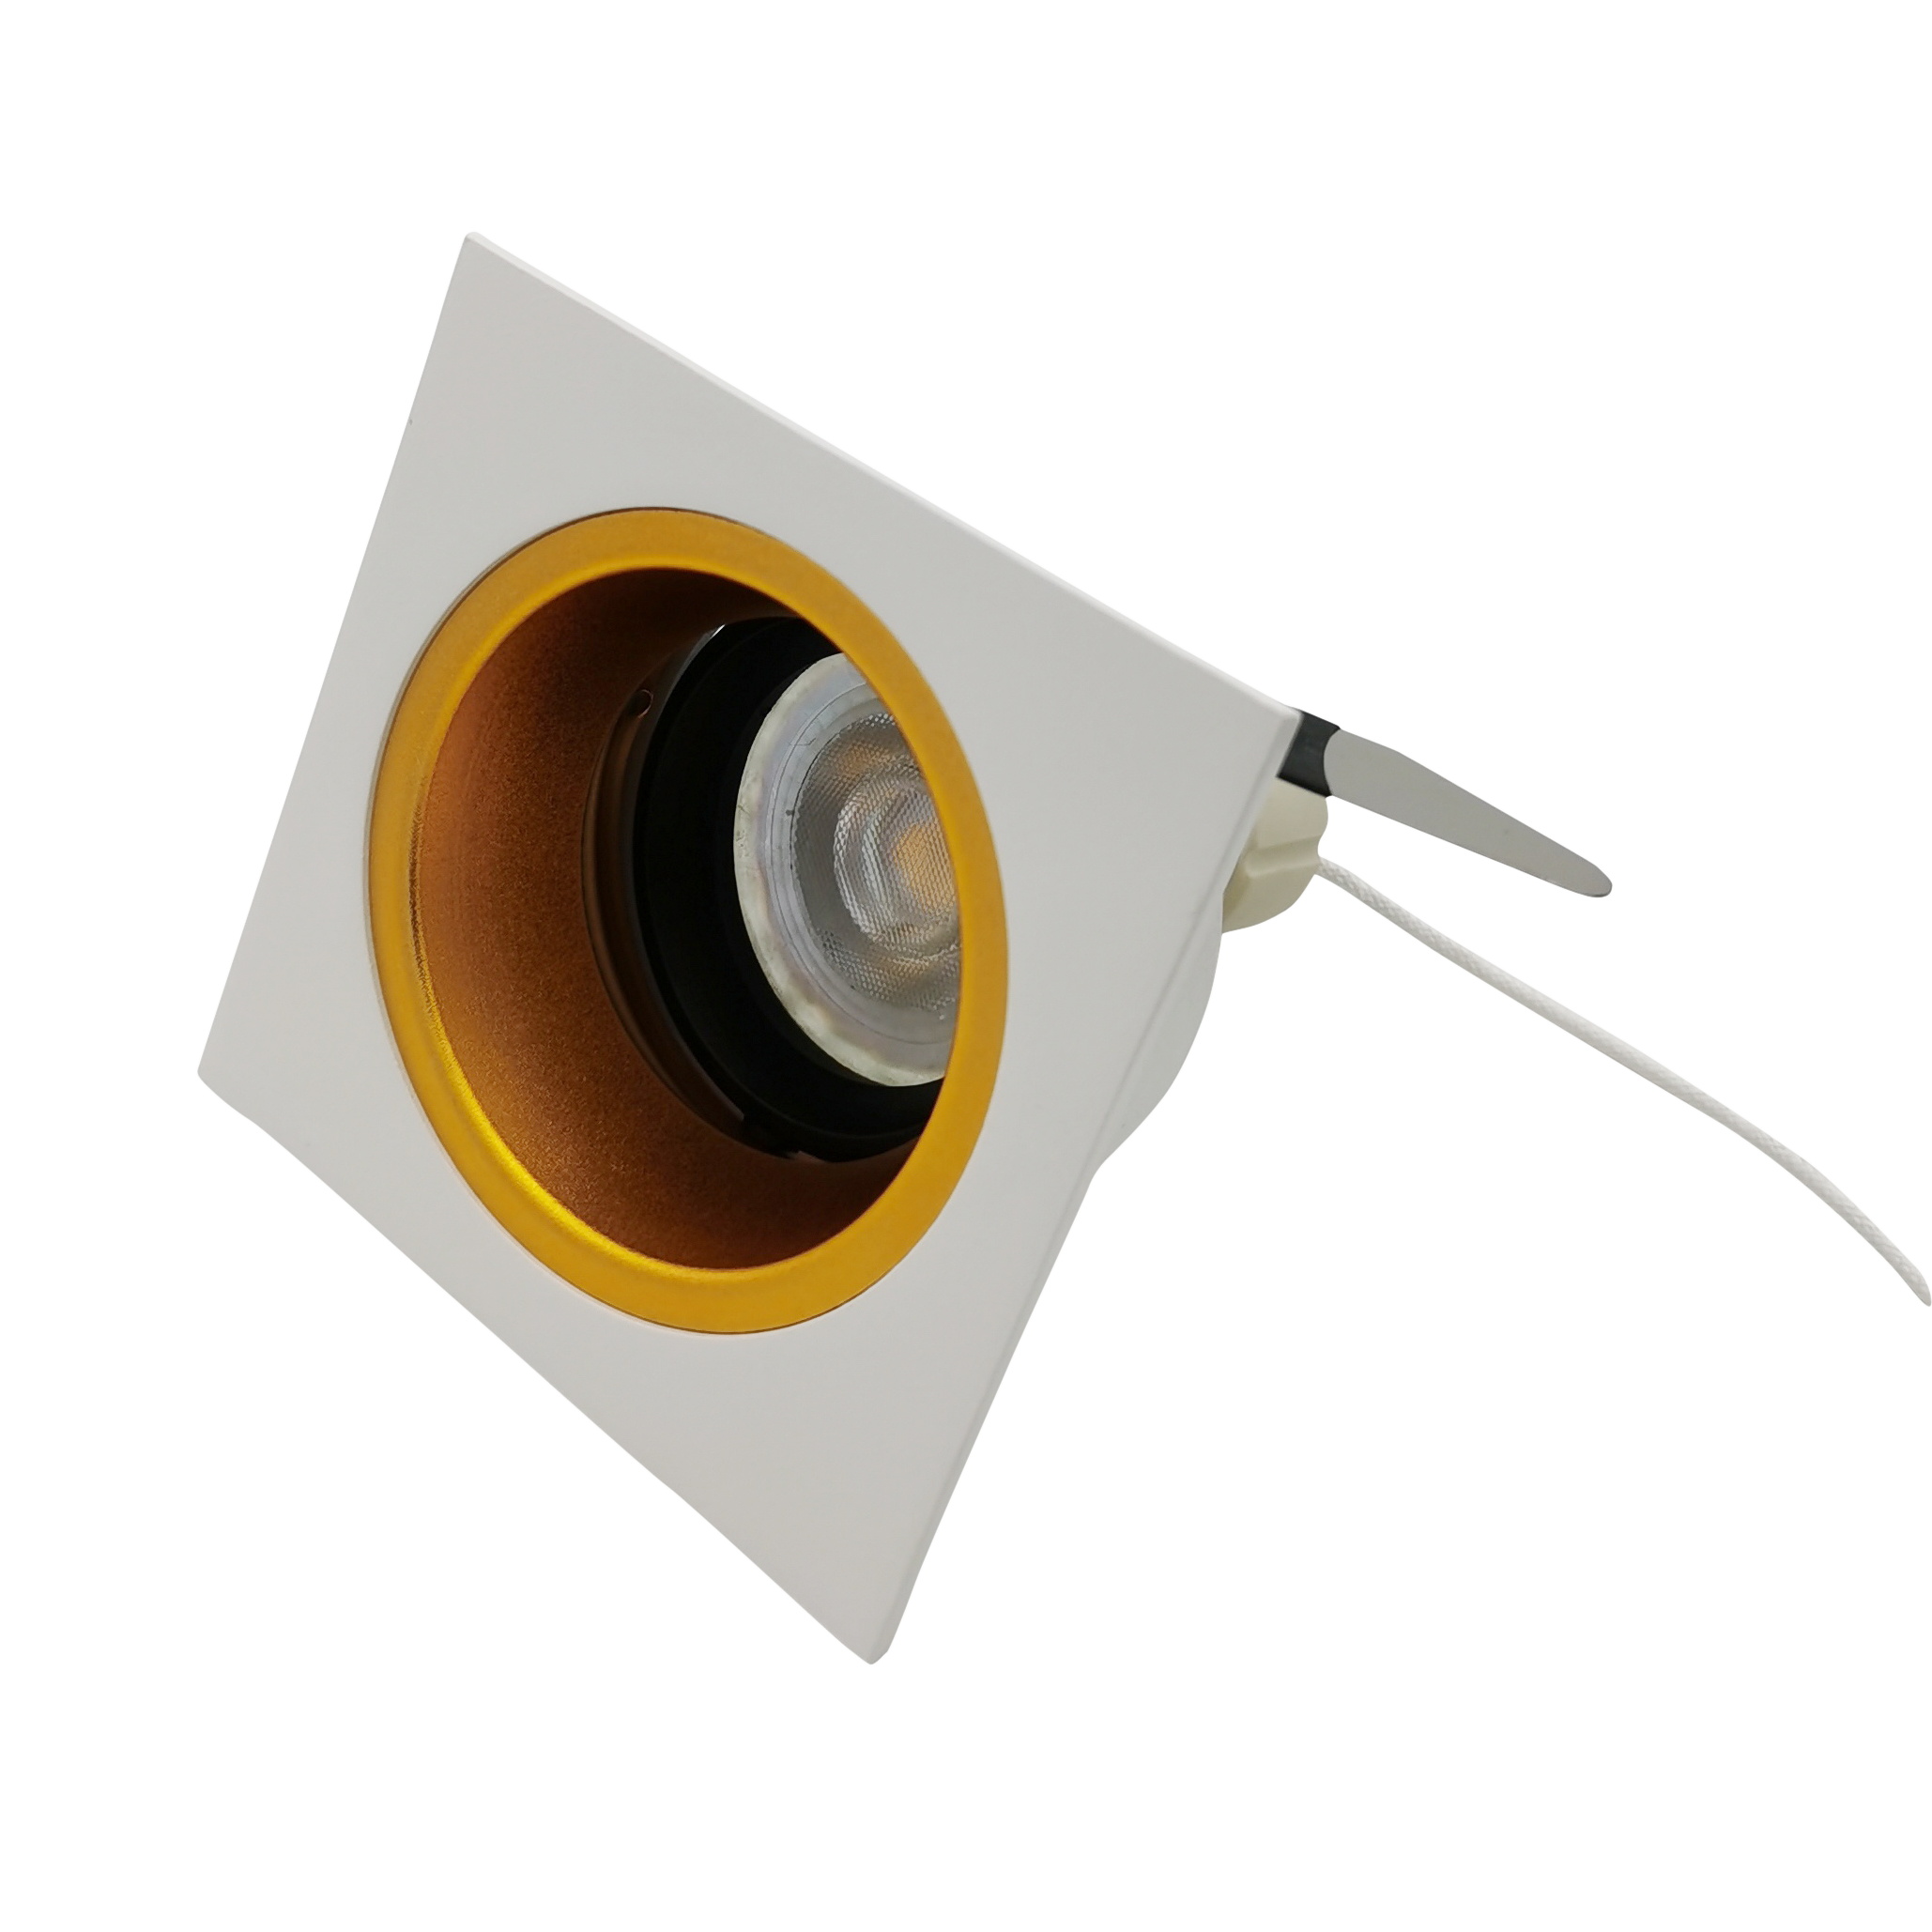 Residential and Home Easy Replacement Square Aluminium Titl GU10 MR16 led downlights